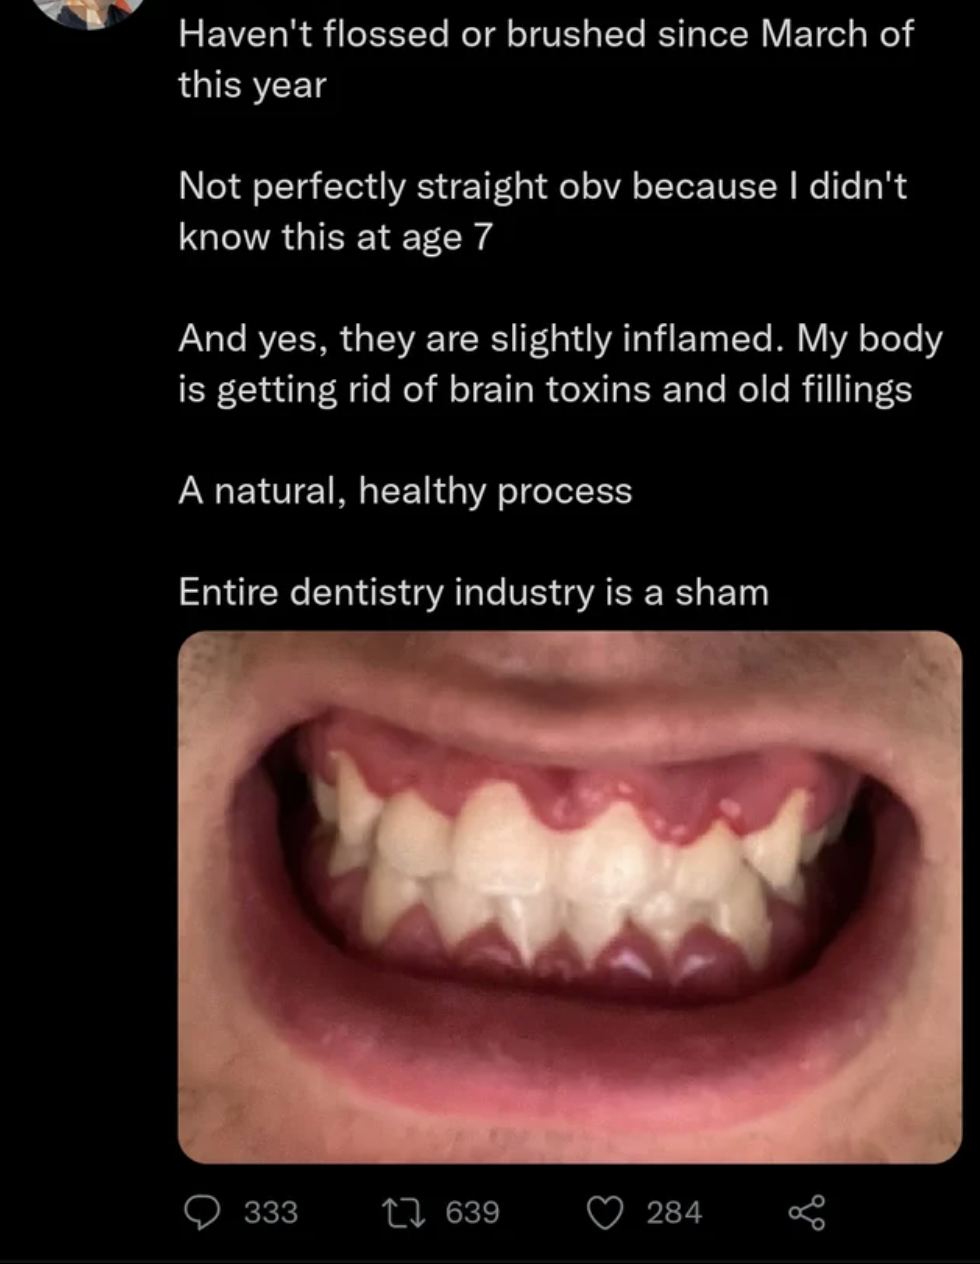 Confidently Incorrect - lip - Haven't flossed or brushed since March of this year Not perfectly straight obv because I didn't know this at age 7 And yes, they are slightly inflamed. My body is getting rid of brain toxins and old fillings A natural, health